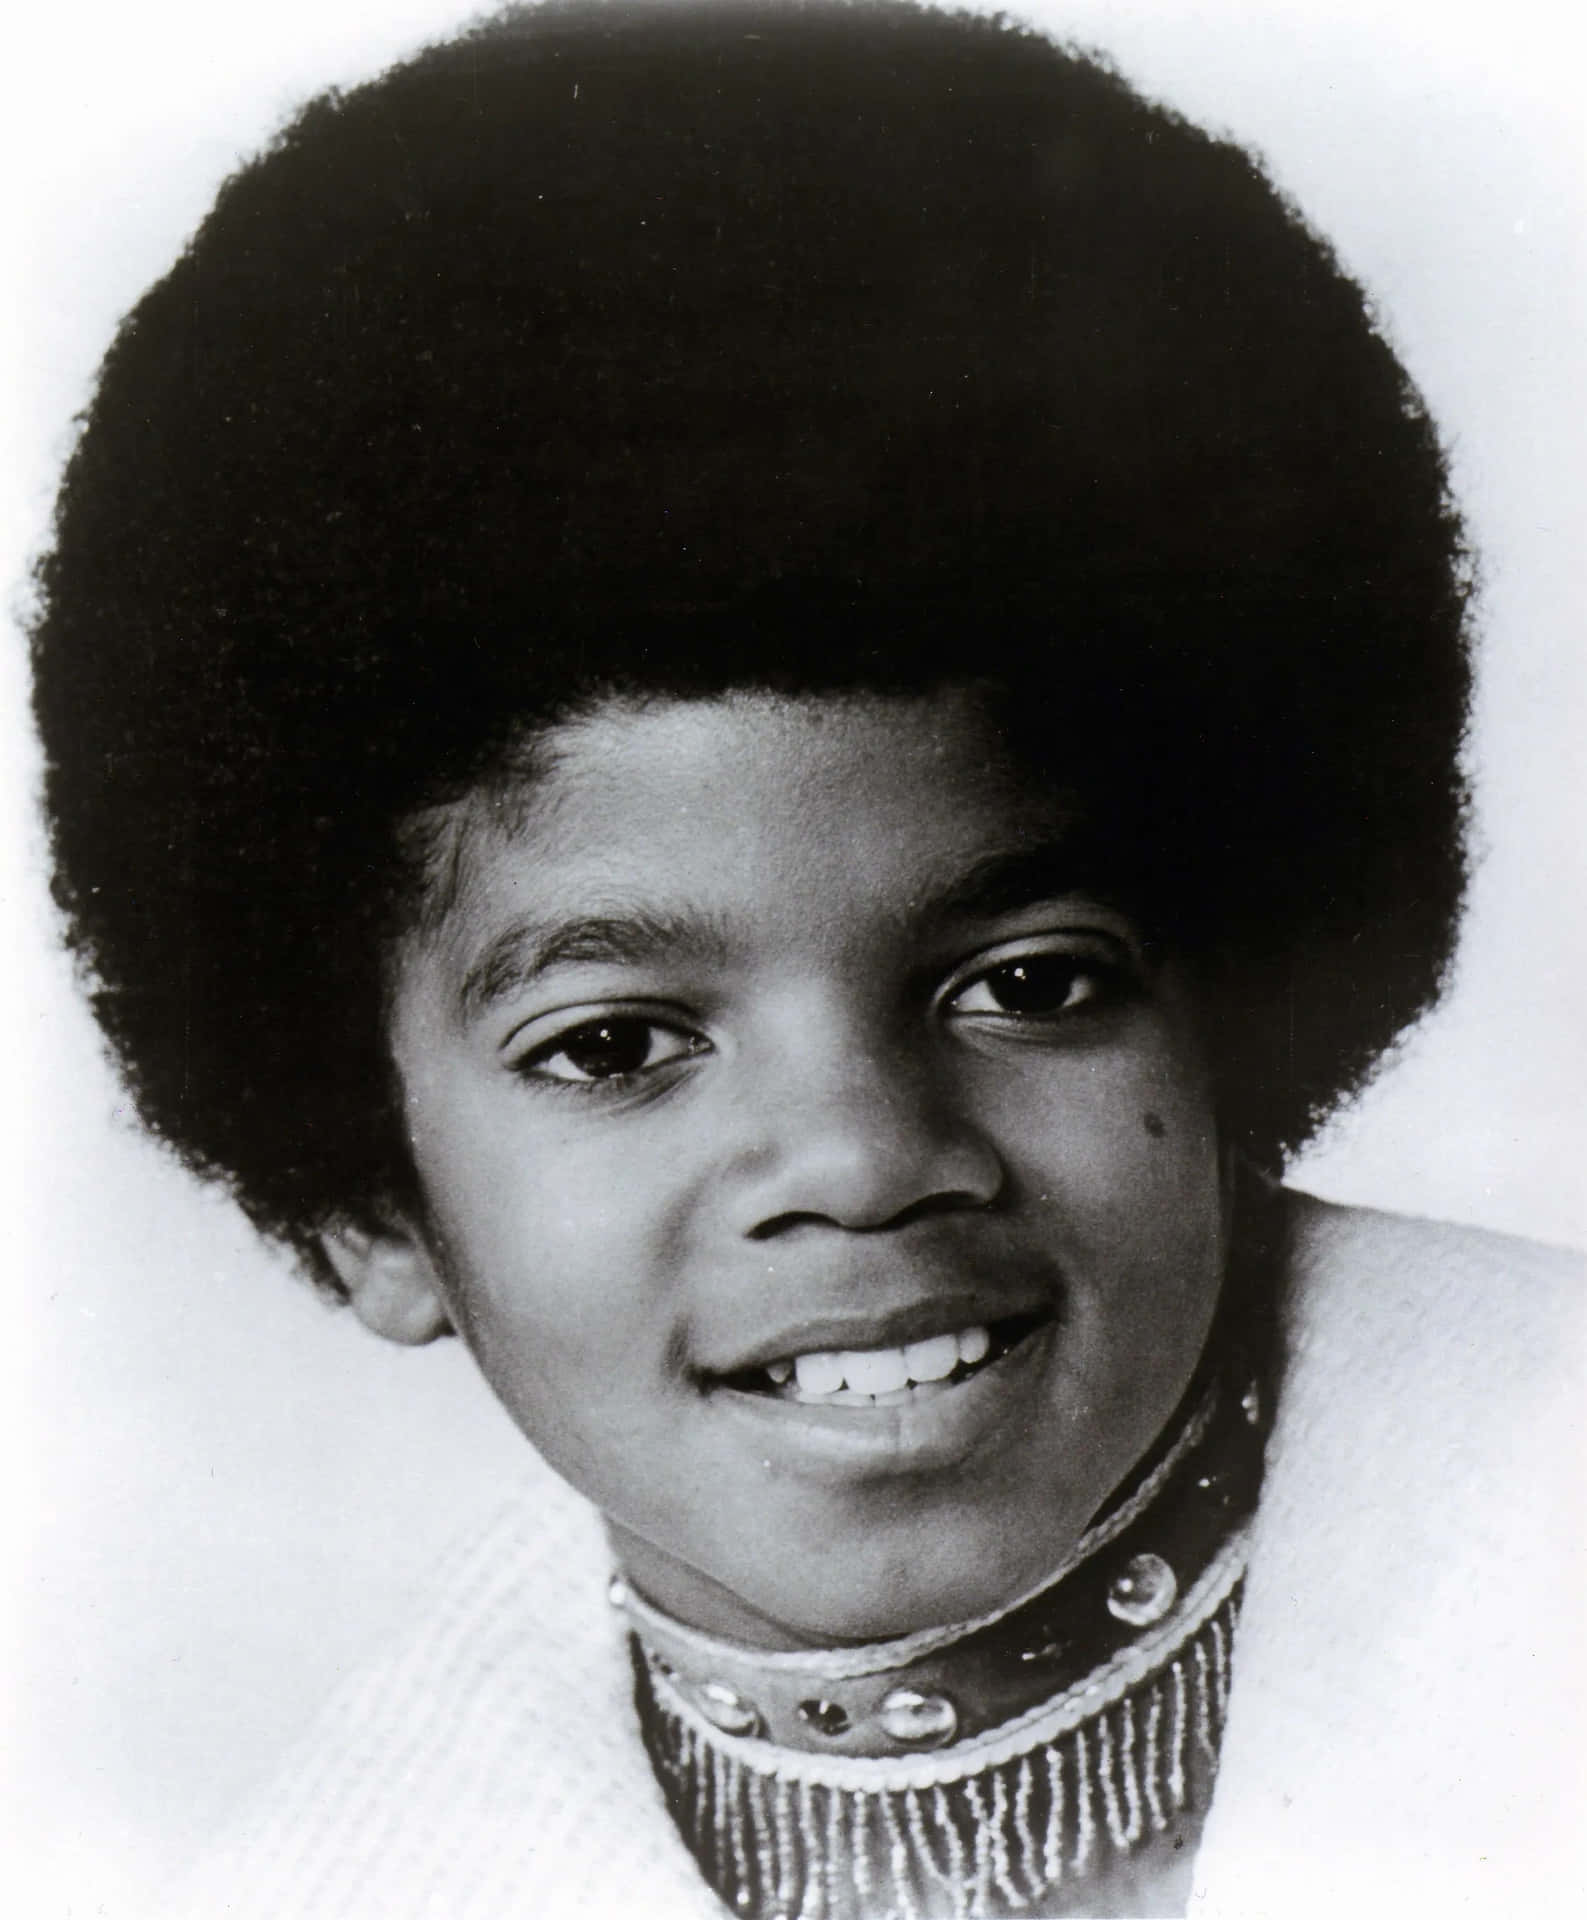 Image   Young Michael Jackson performing at the Jackson 5 concert